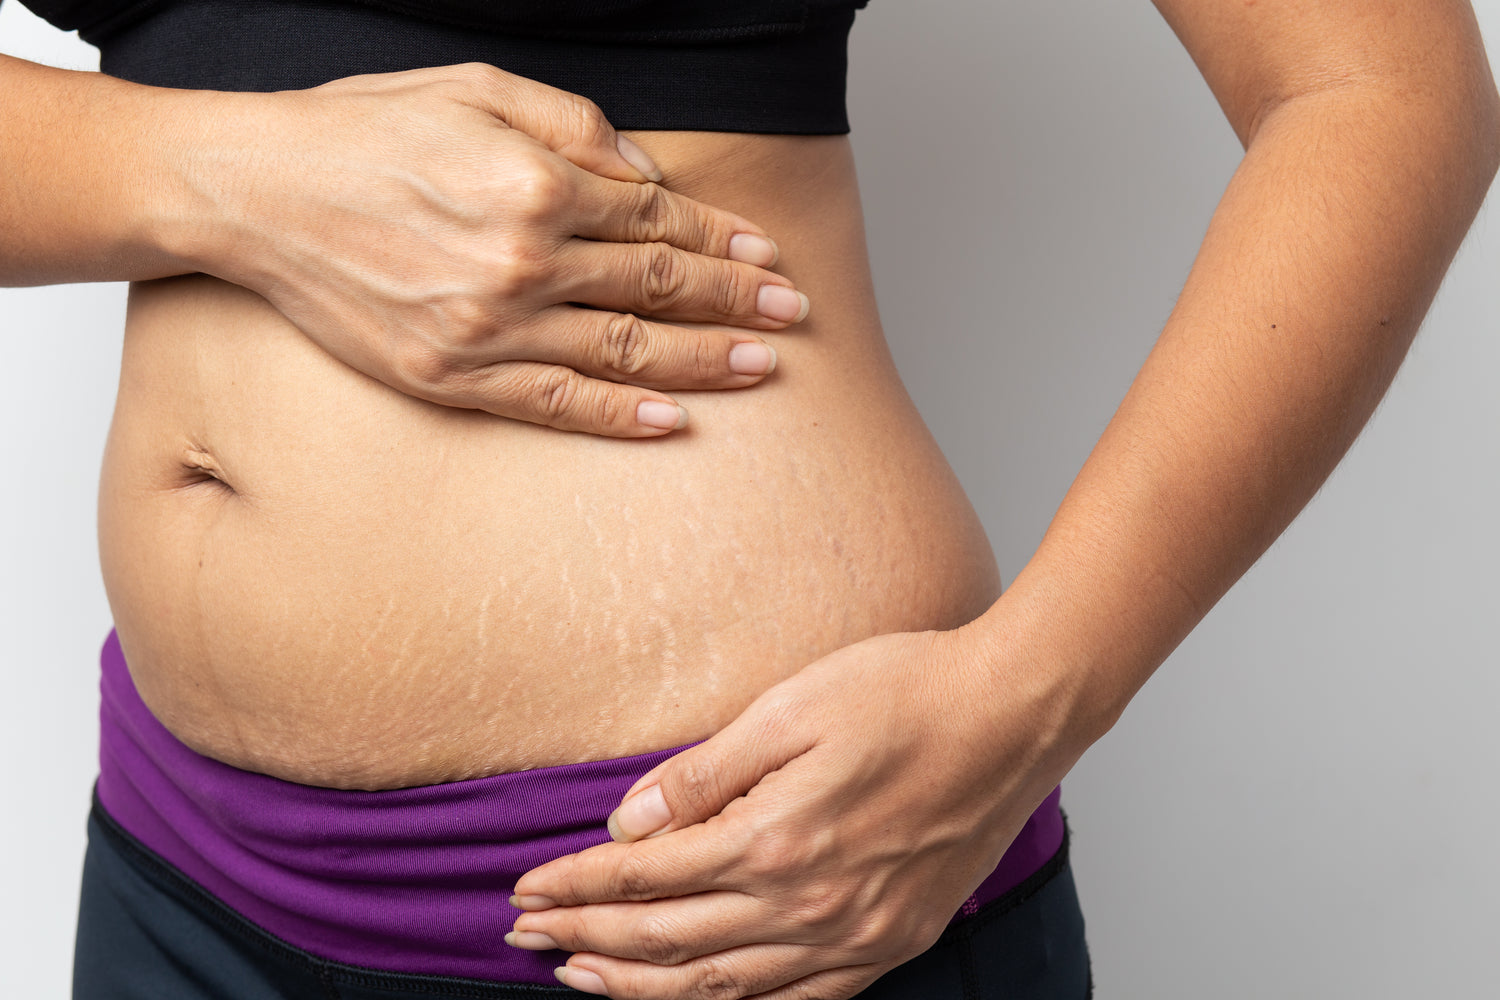 Why Are Stretch Marks More Visible After Losing Weight?